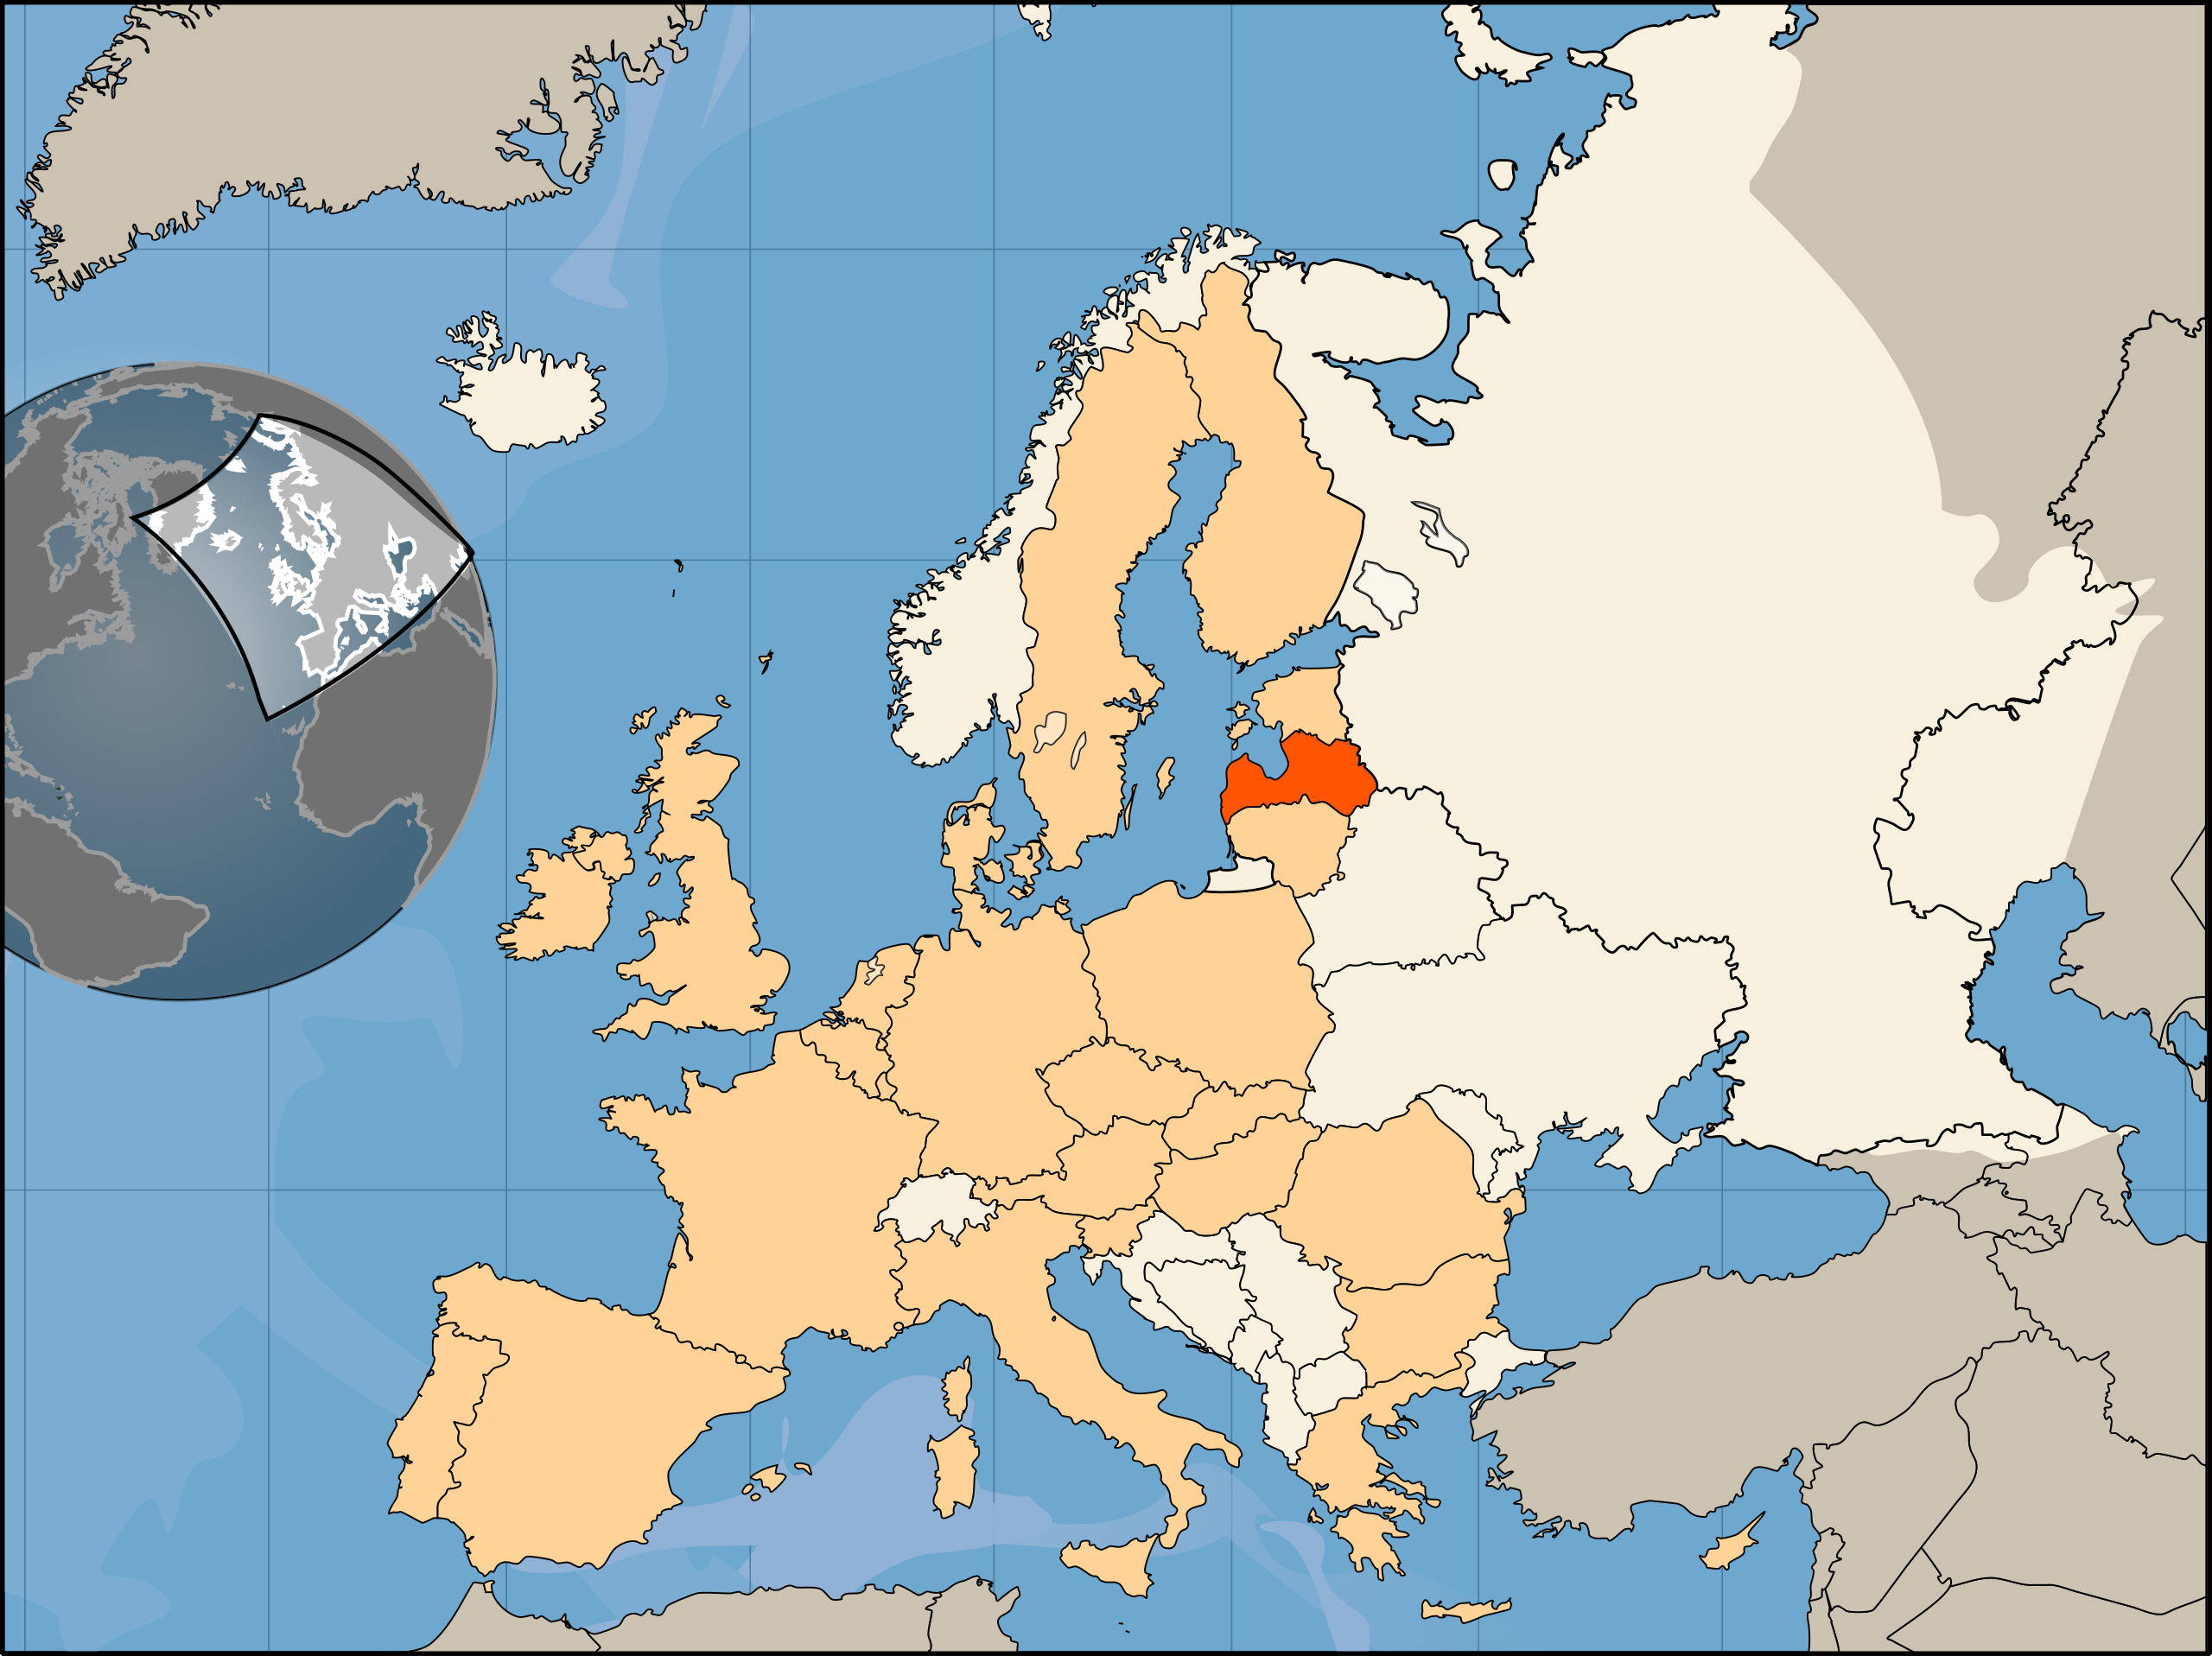 File:Europe Location LV.svg - Wikimedia Commons